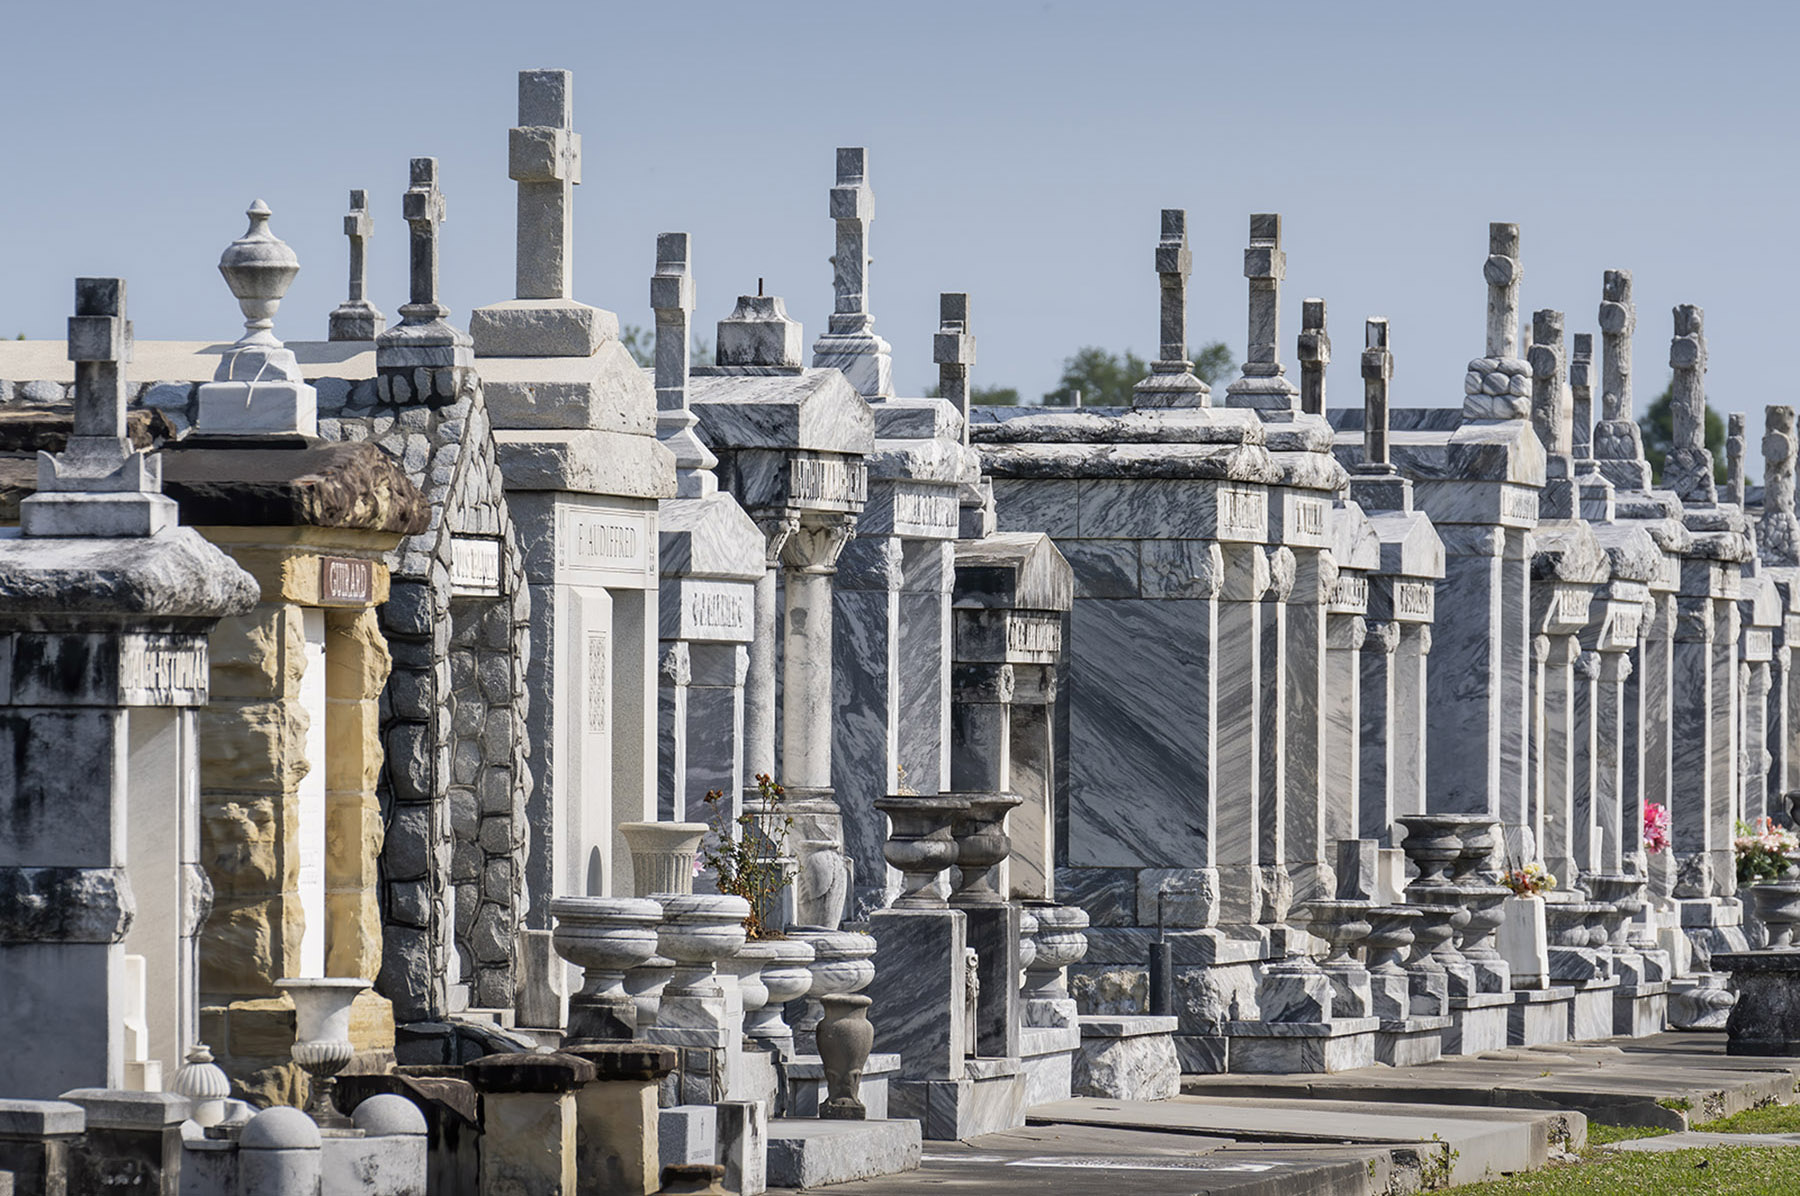 row of tombs in New Orleans' St. Louis Cemetery No. 3